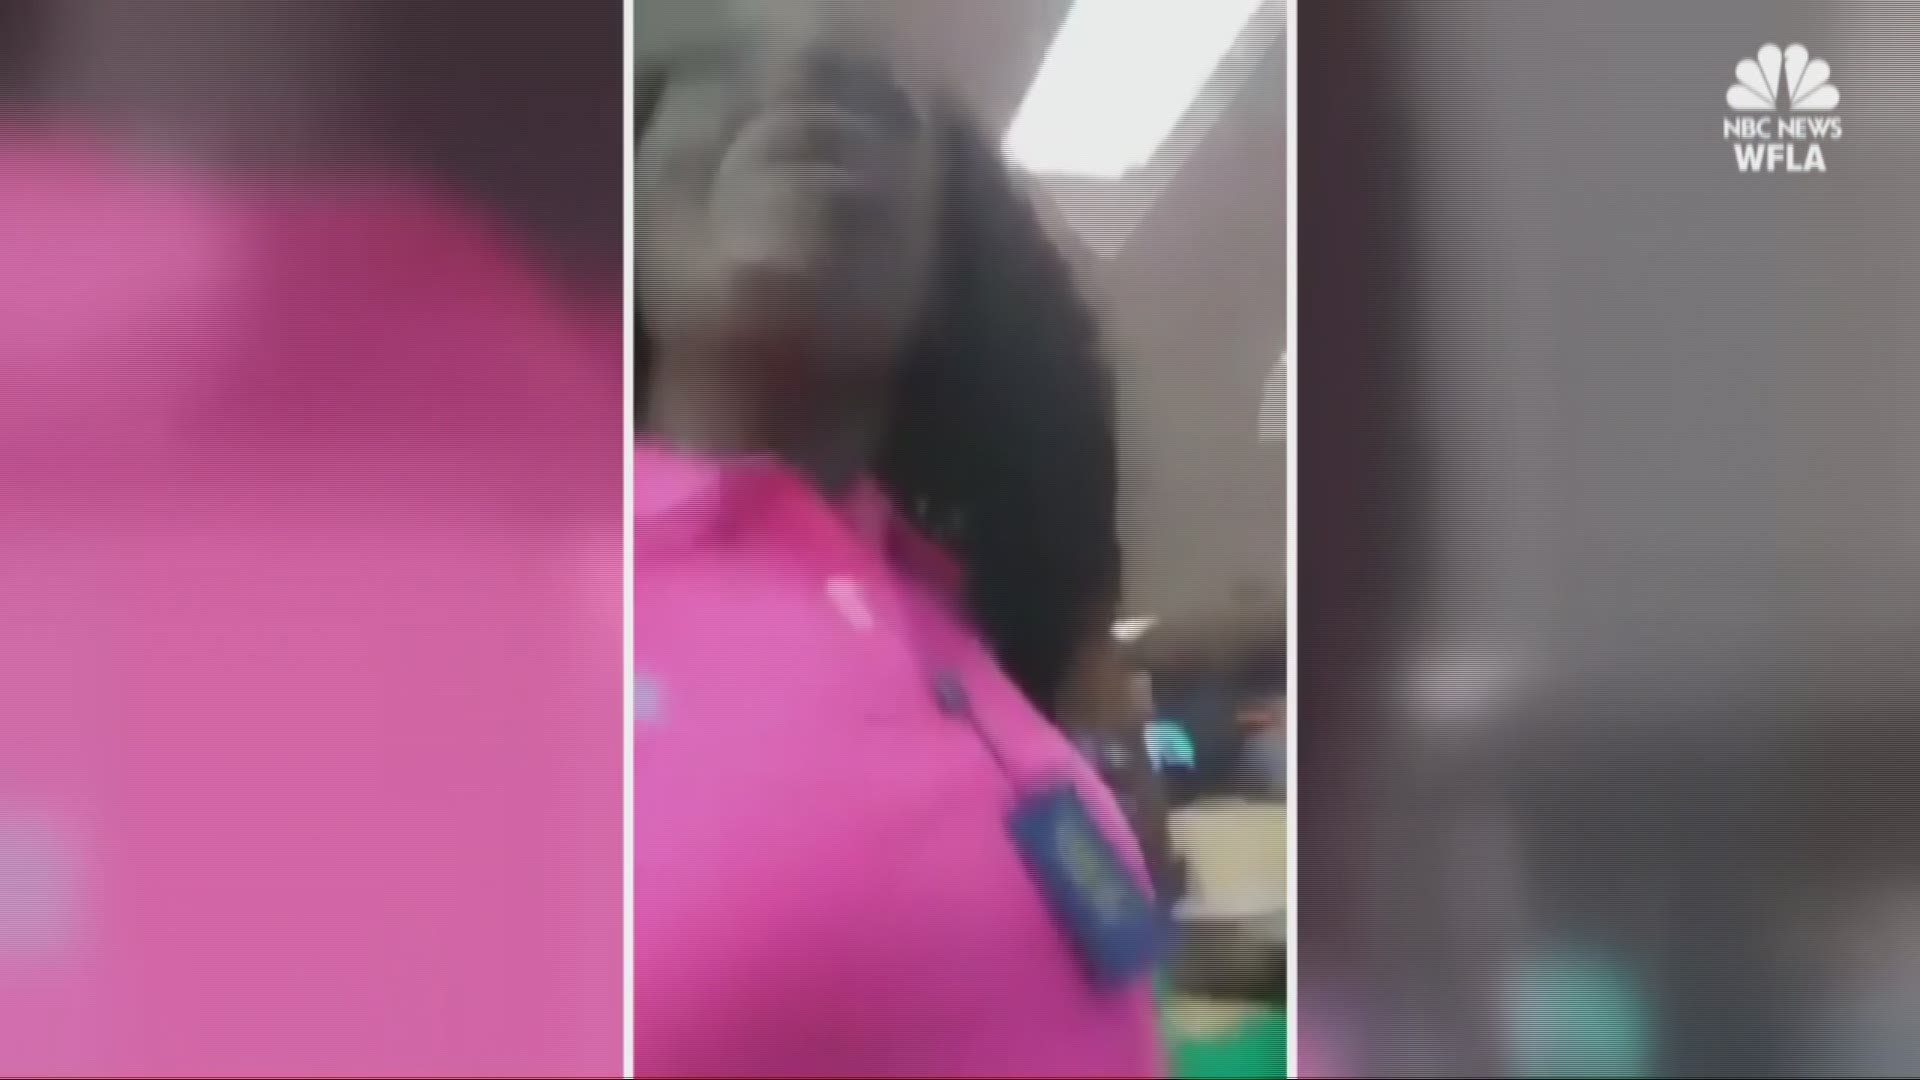 Florida police nab woman wanted on outstanding warrants after noticing her live streaming video from inside a Chuck E. Cheese restaurant.